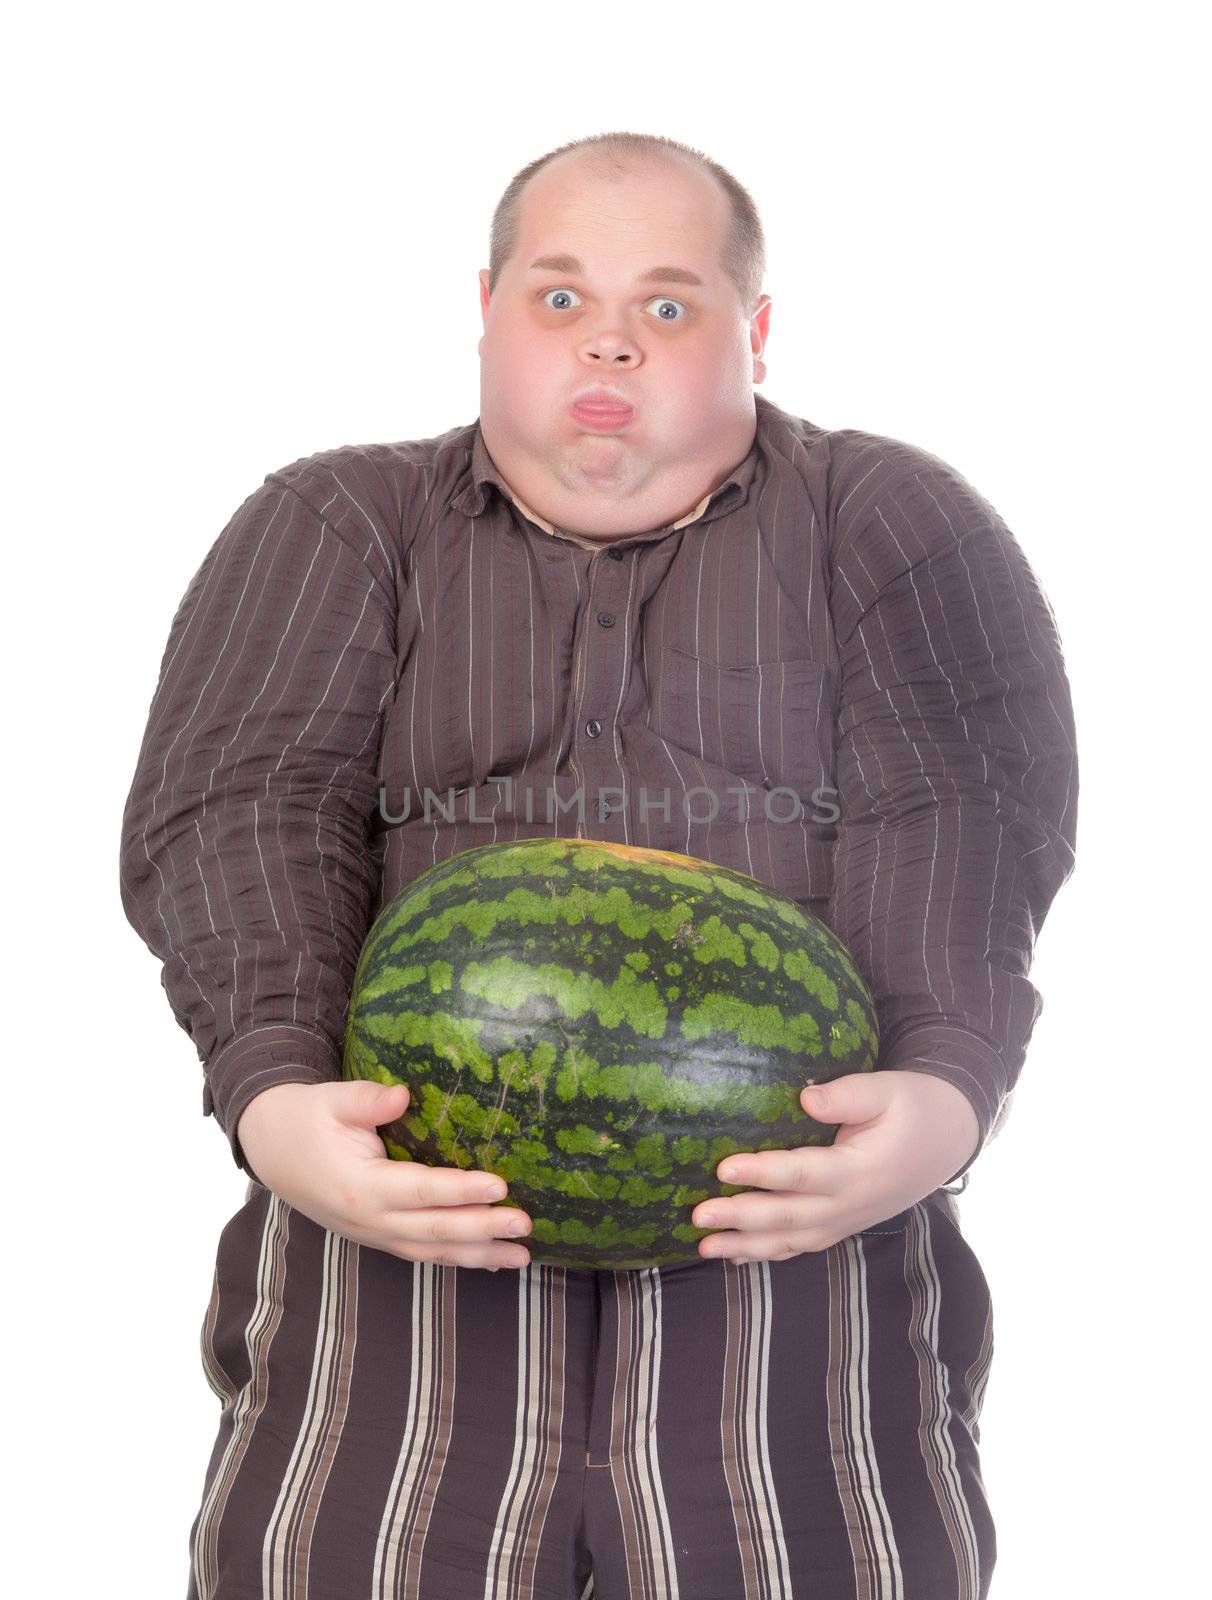 Humorous image of an unfit obese man struggling to hold the weight of a whole watermelon held at arms length in front of his huge protruding belly, isolated on white